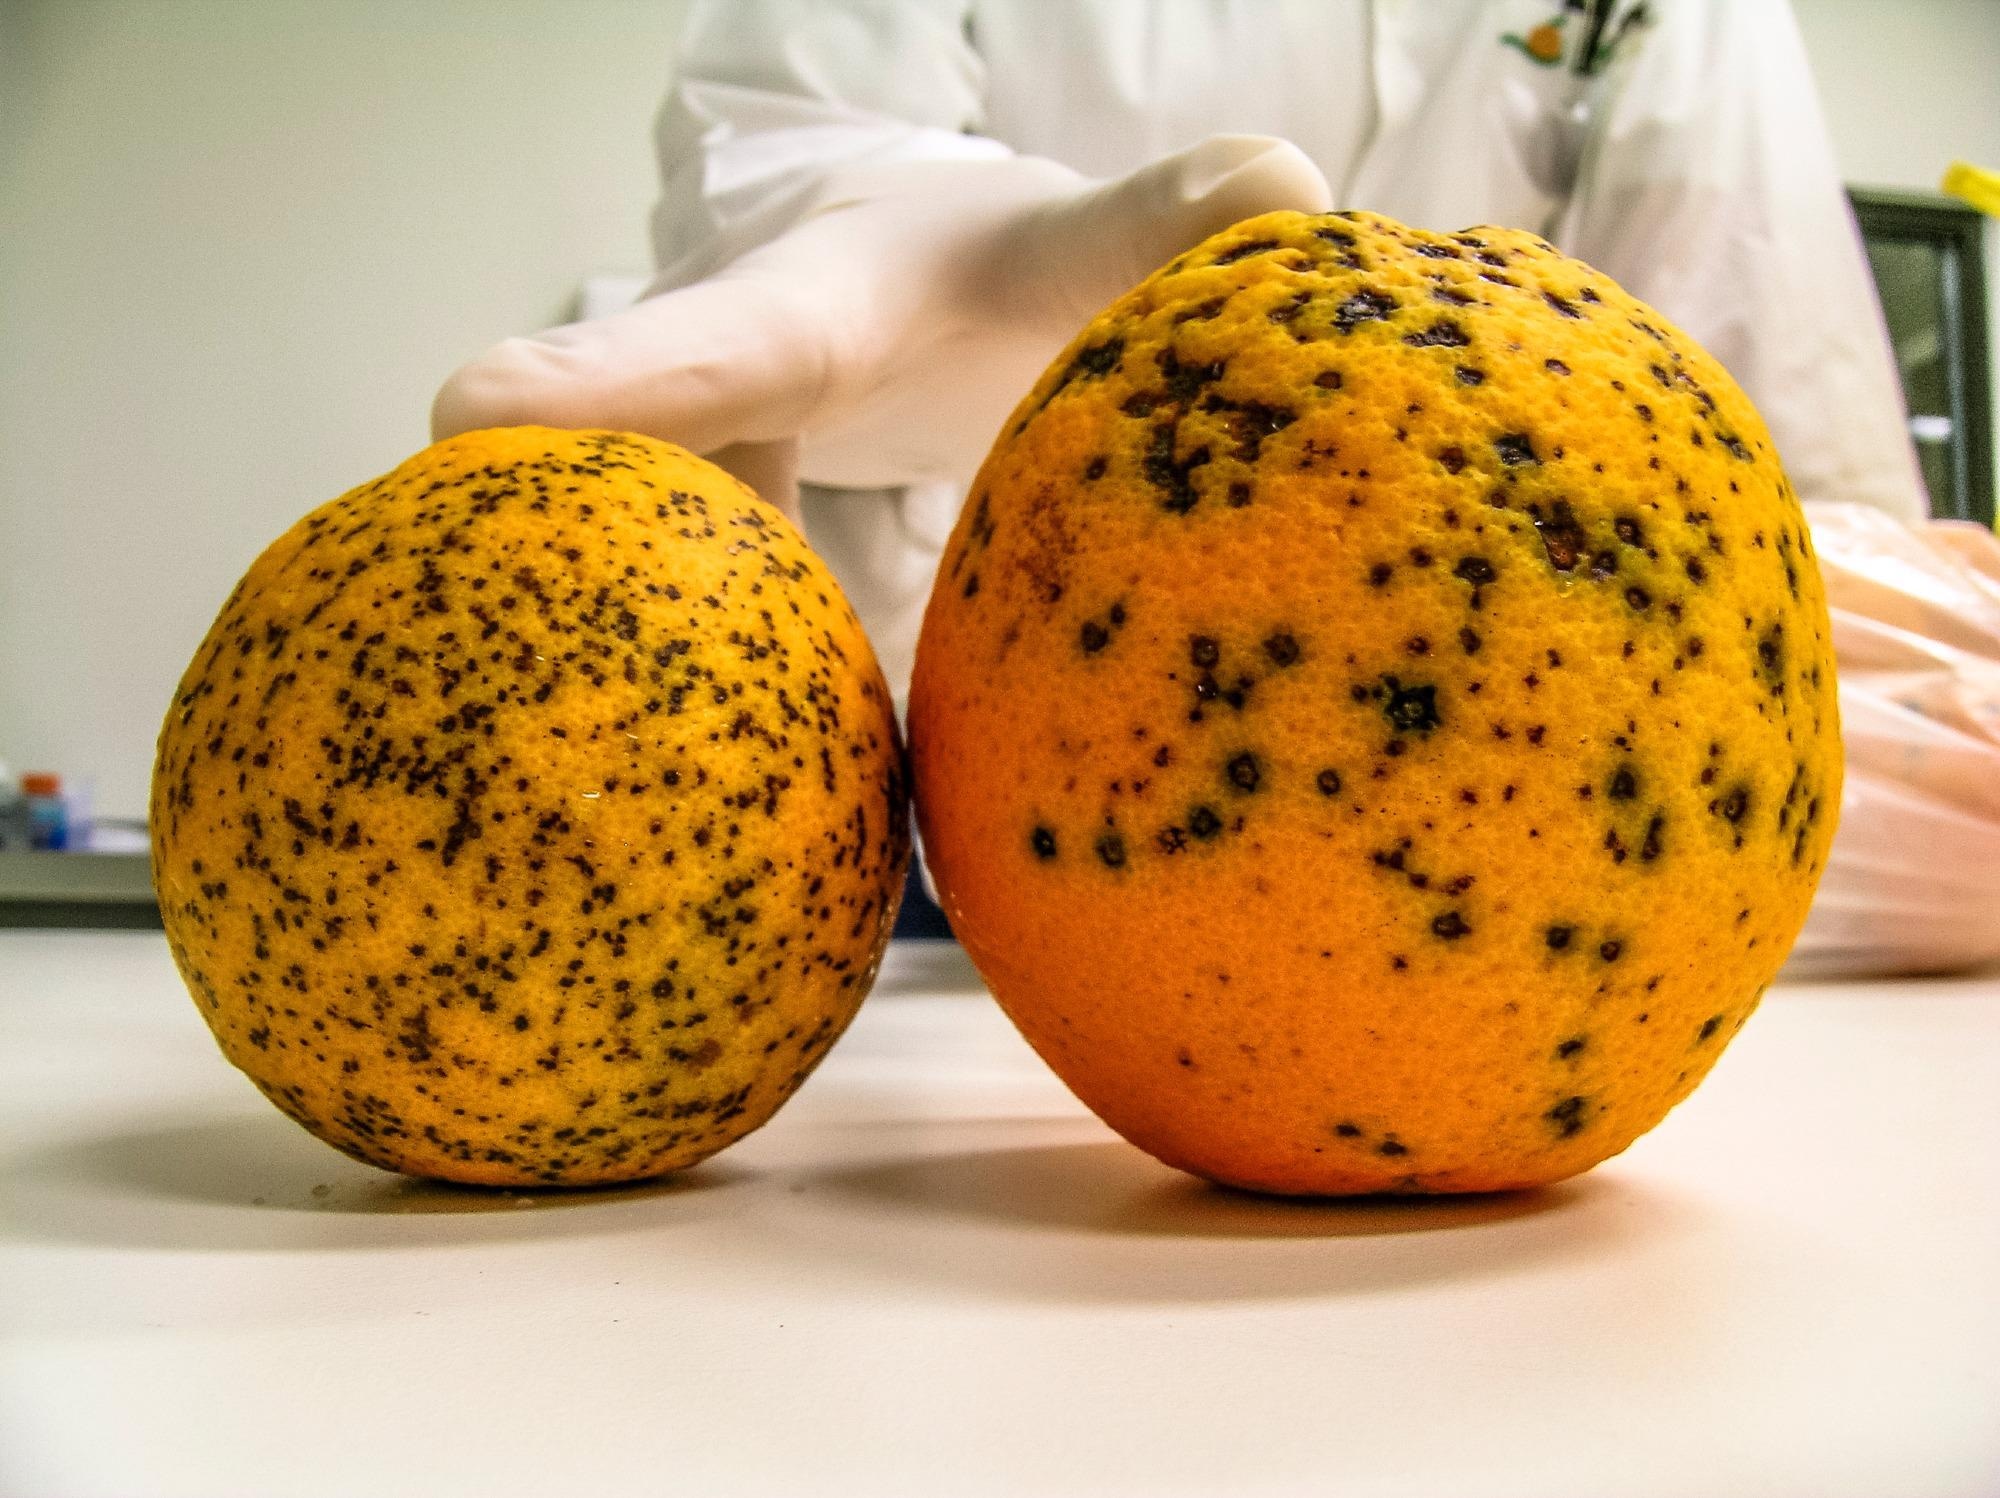 Oranges infested with Amarelinho or CVC, Citrus Variegated Chlorosis, which is a disease caused by the bacterium Xylella fastidiosa